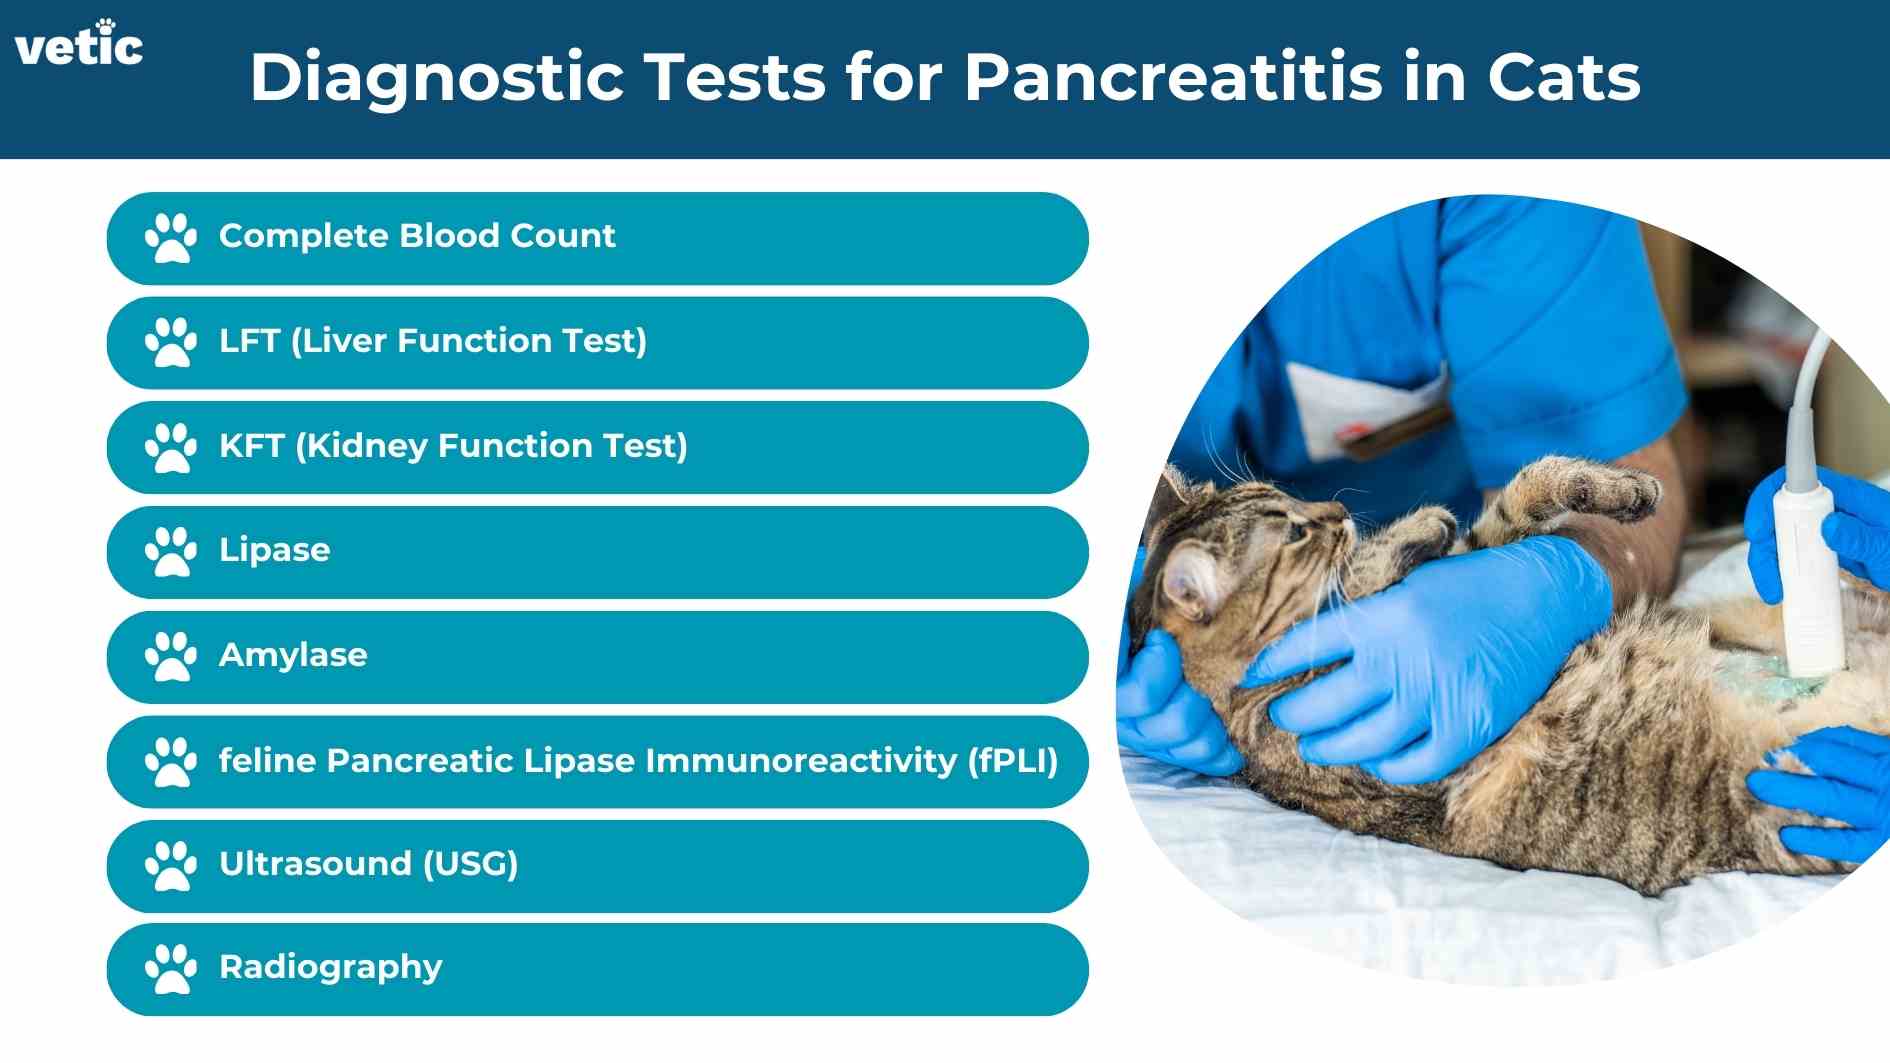 Inforgaphic titled the Diagnostic tests for pancreatitis in cats. Complete Blood Count LFT (Liver Function Test) KFT (Kidney Function Test) Lipase Amylase feline Pancreatic Lipase Immunoreactivity (fPLI) Ultrasound (USG) Radiography